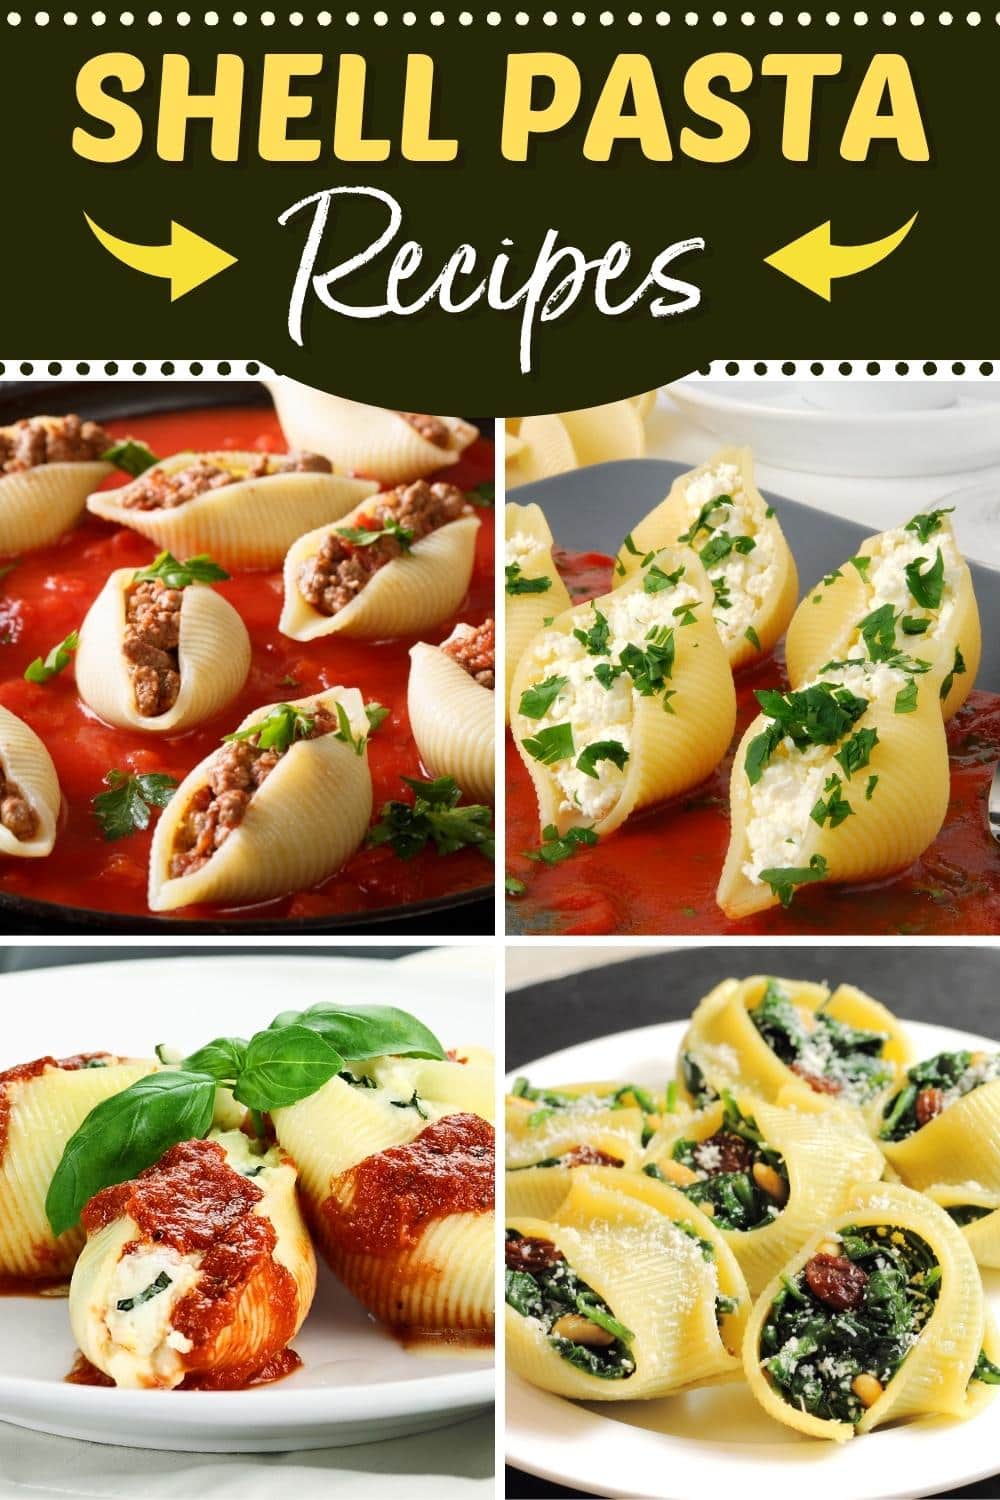 13 Easy Shell Pasta Recipes to Satisfy Your Carb Cravings - Insanely Good